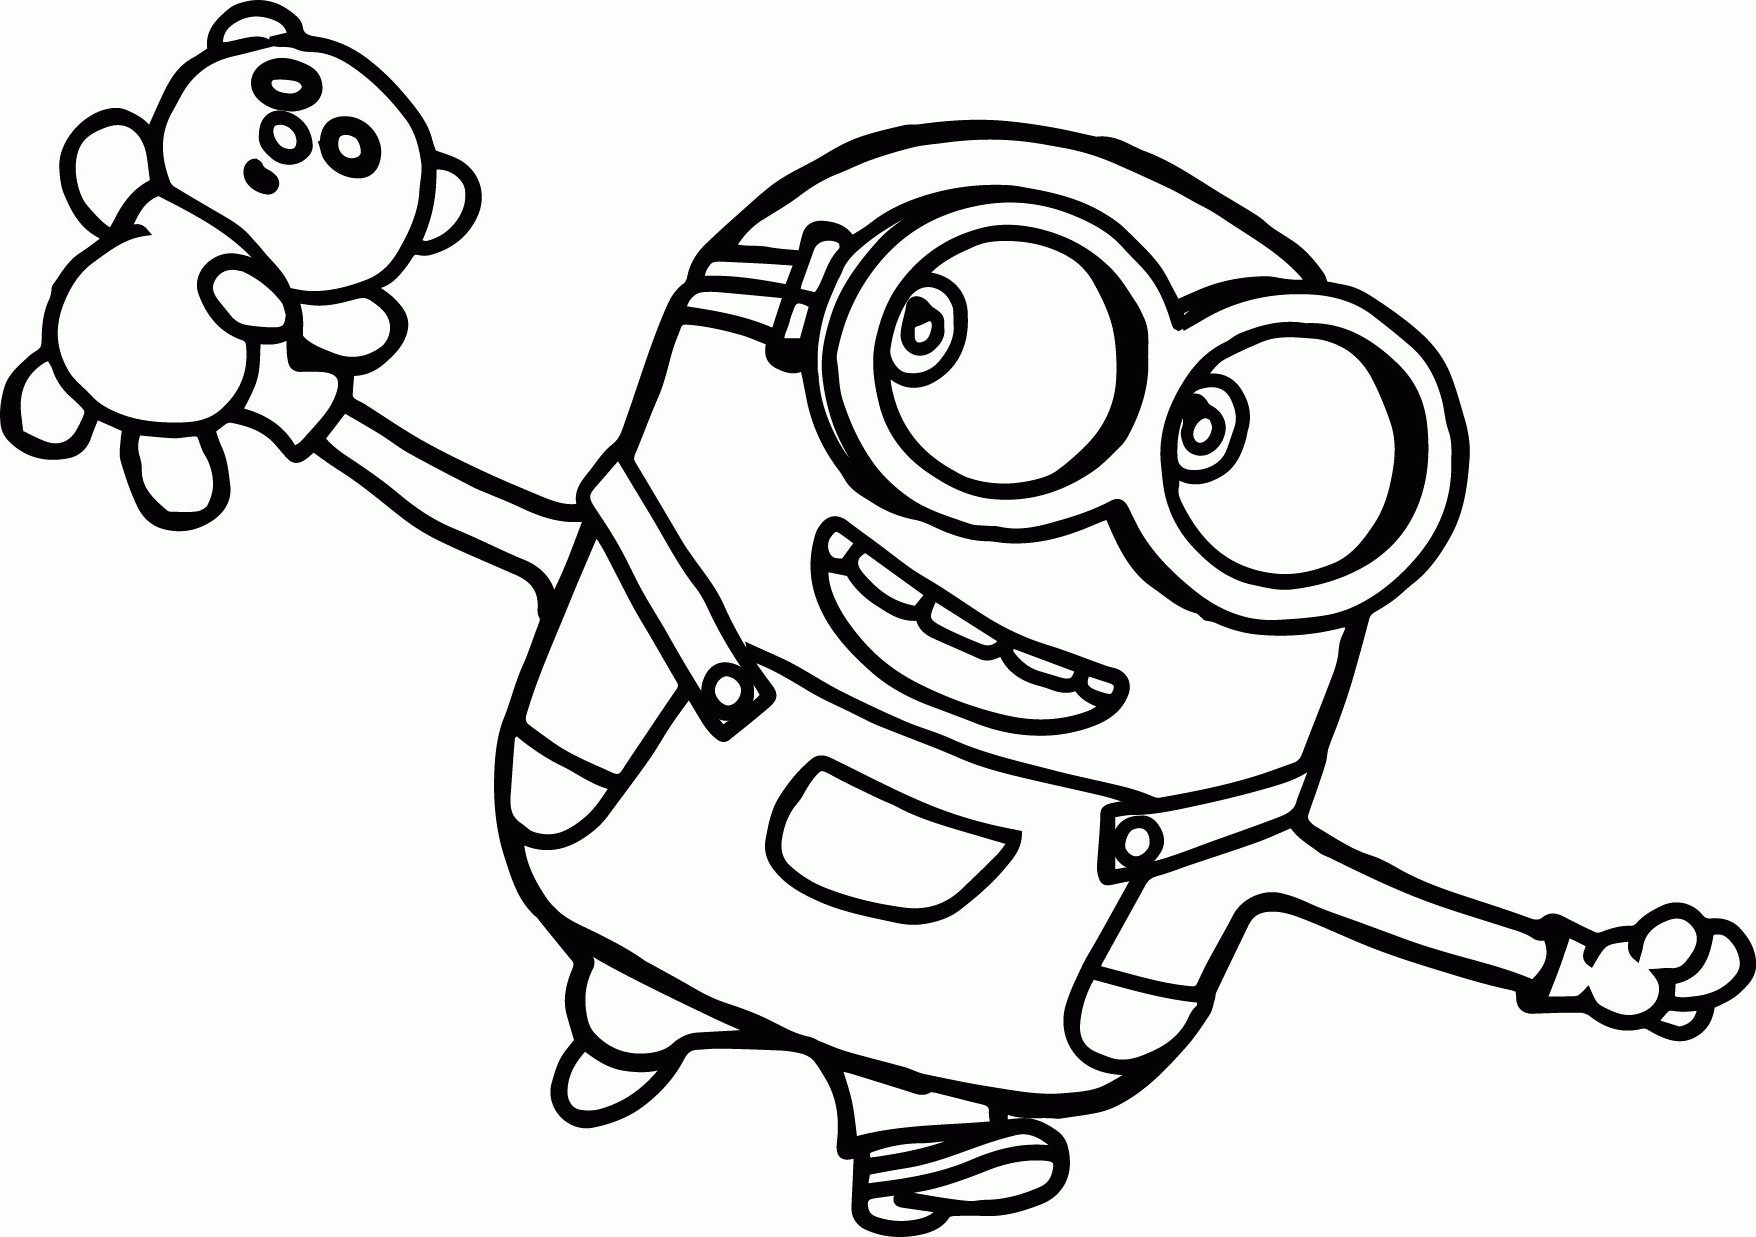 Minion Bob With Teddy Coloring Page   Free Printable Coloring ...